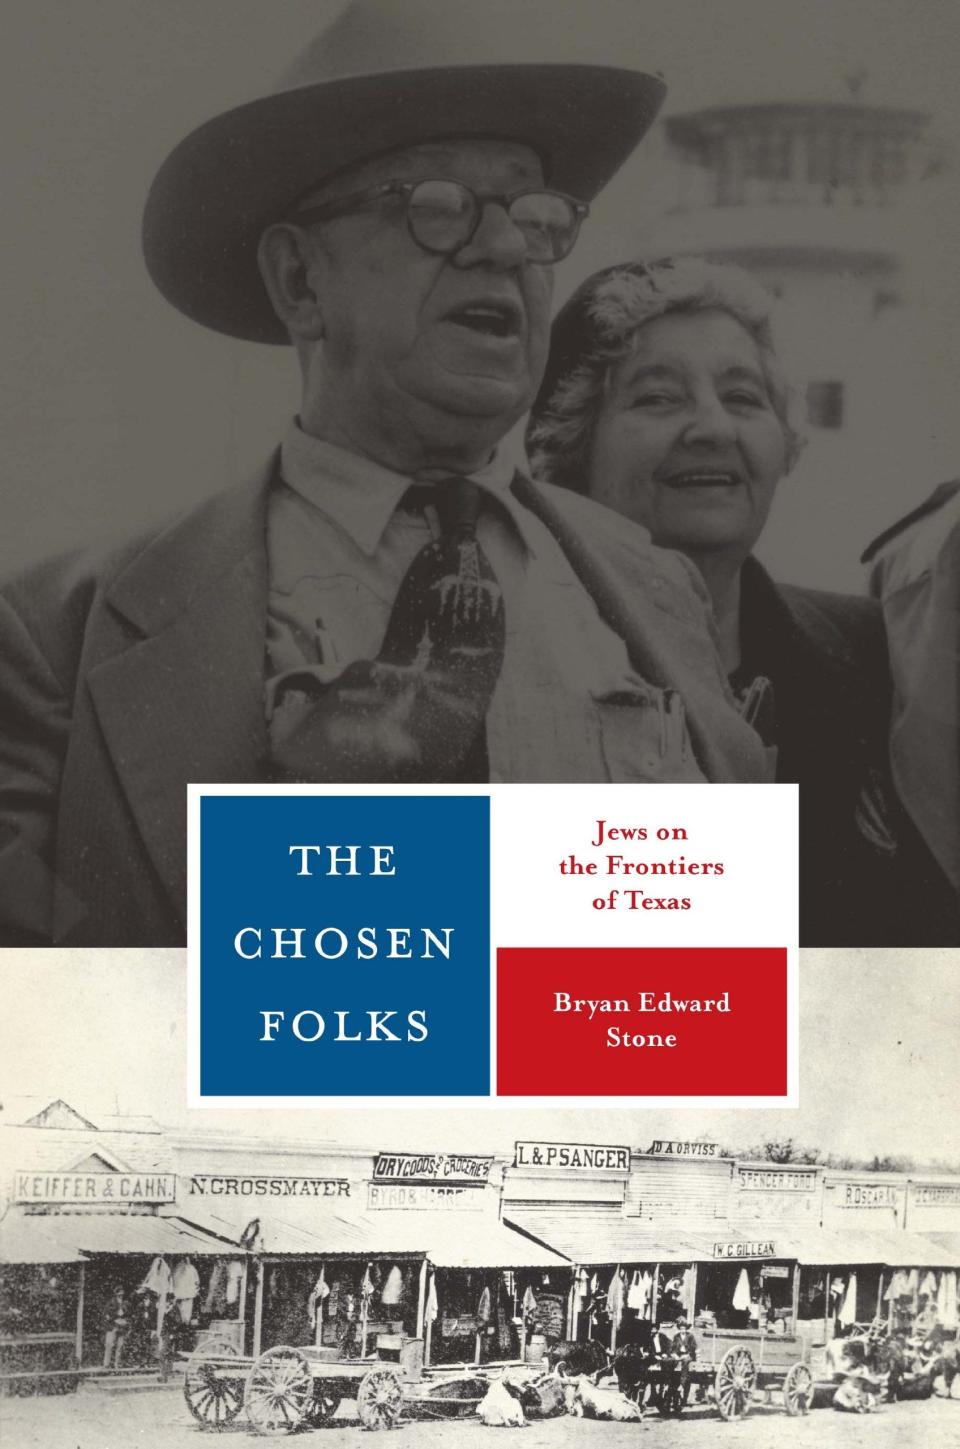 "The Chosen Folks: Jews on the Frontiers of Texas" by Bryan Edward Stone was published in 2022.